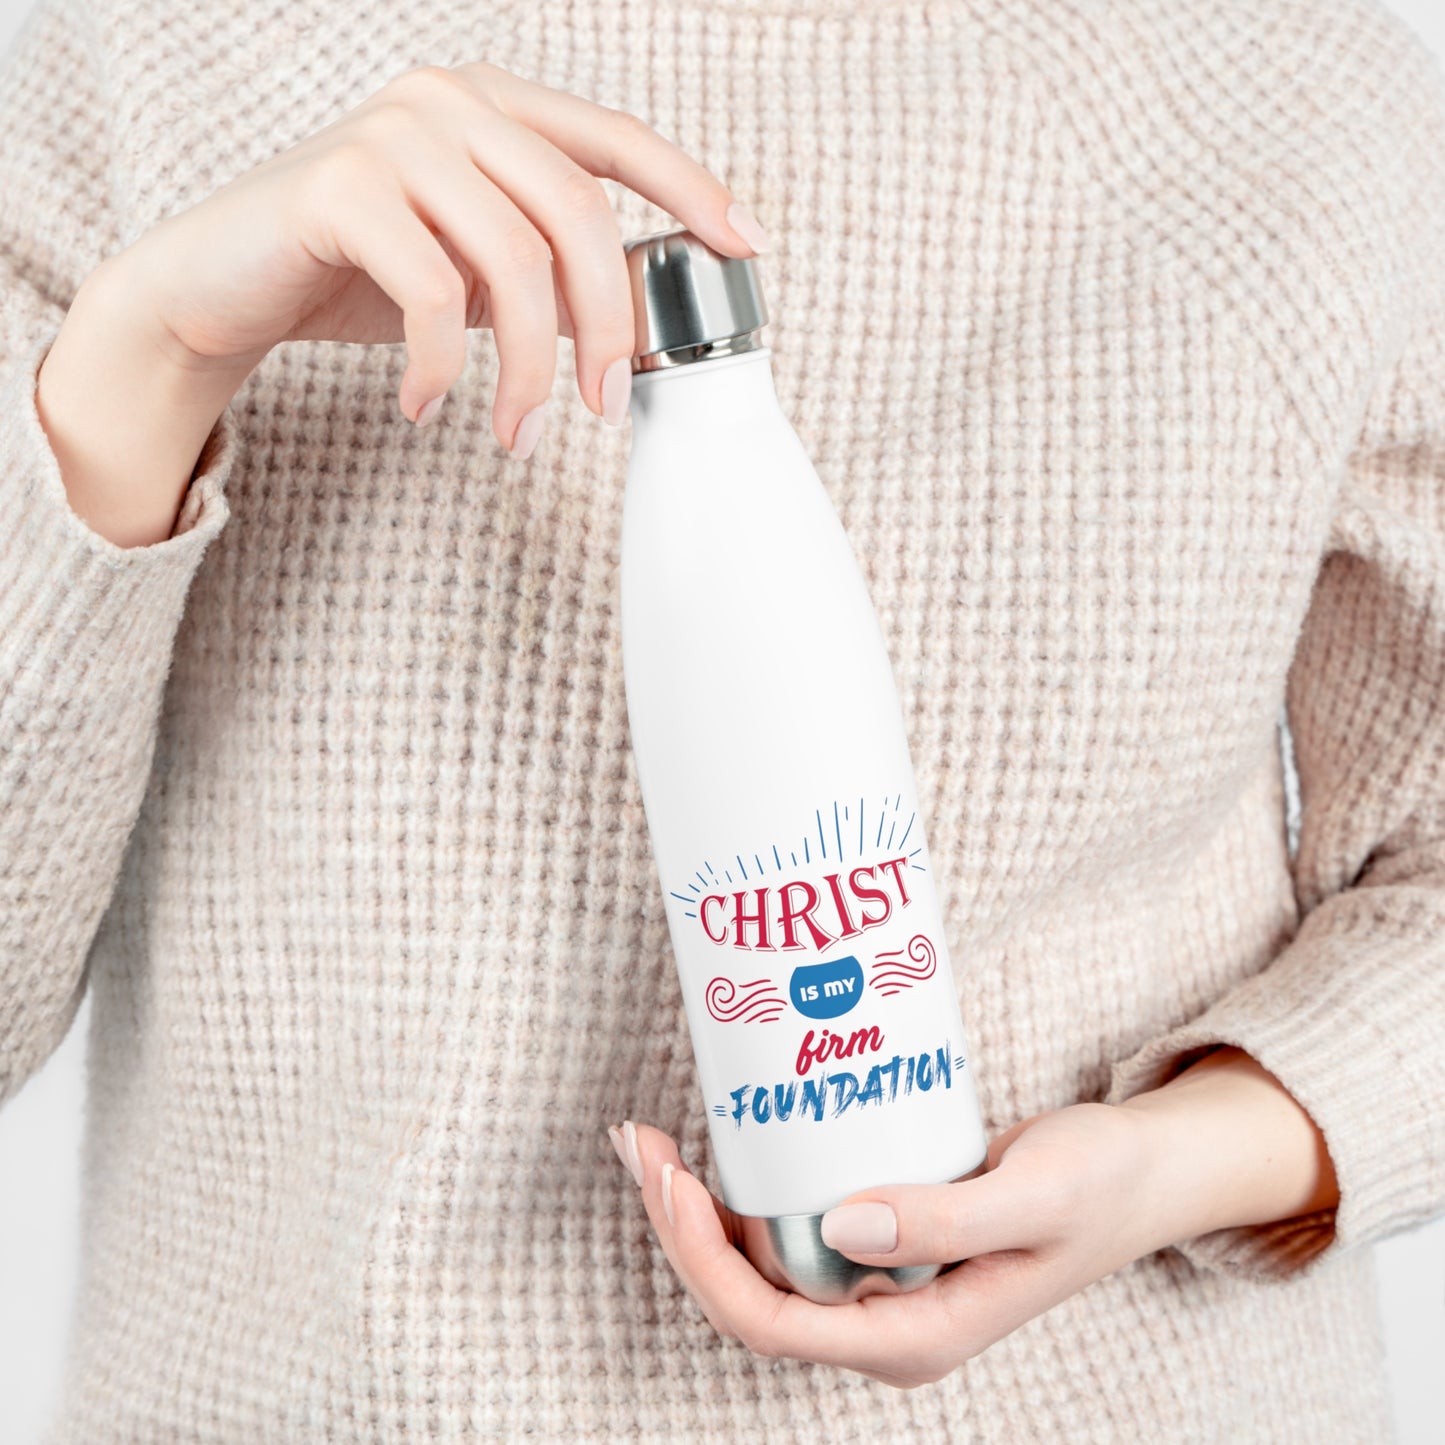 Christ Is My Firm Foundation (2) Insulated Bottle 20 oz